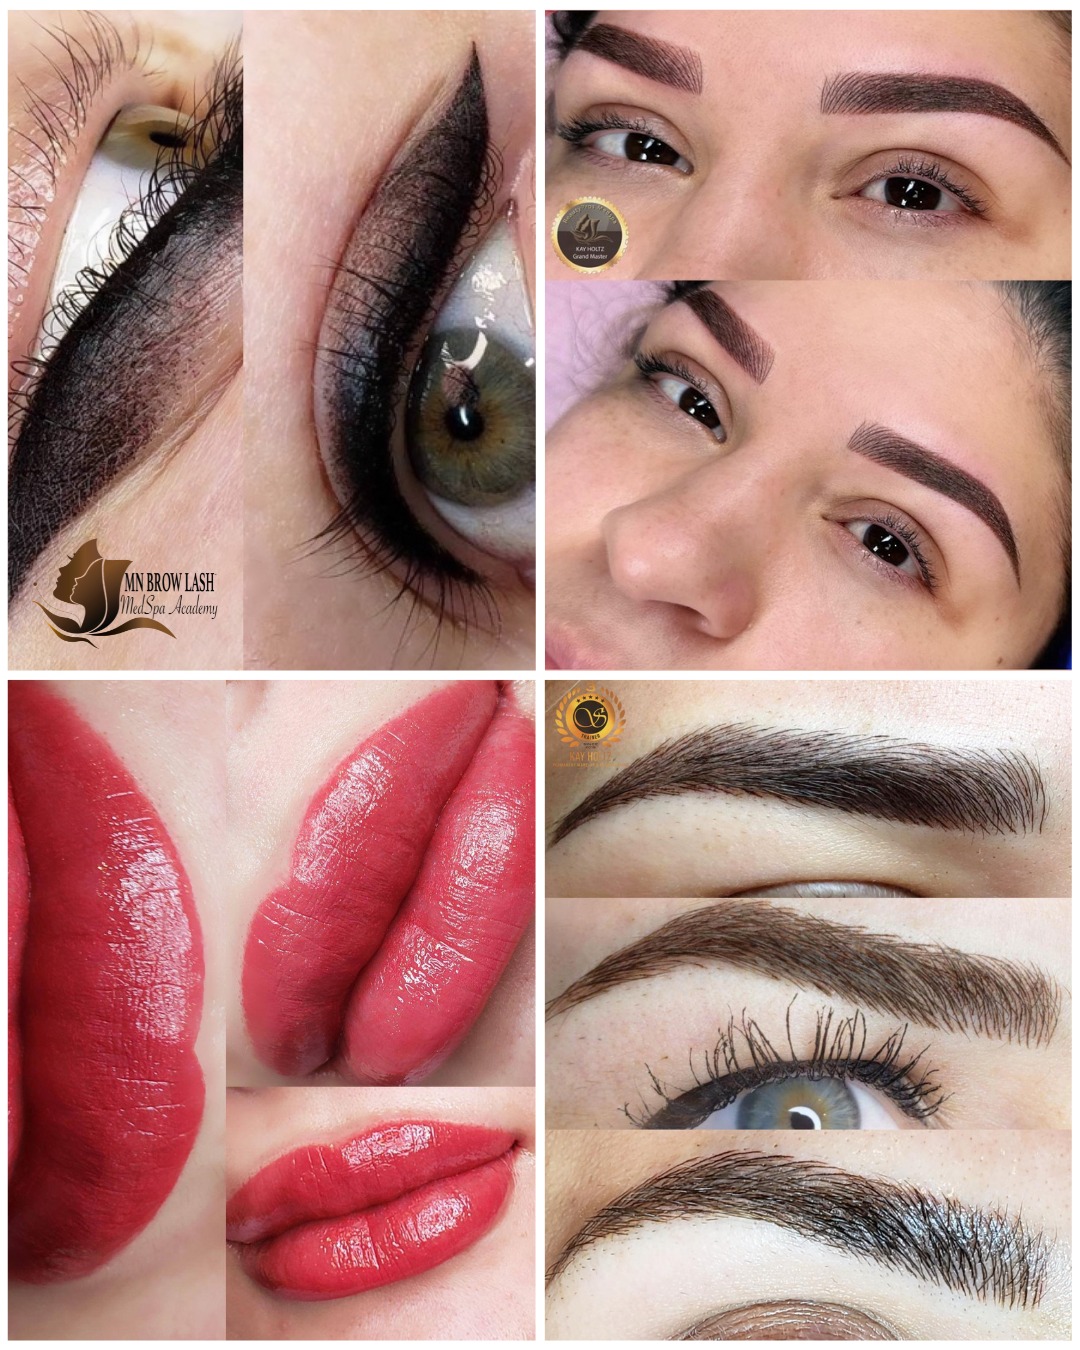 From Novice to Expert: Navigating the Levels of Eyelash Extension Training